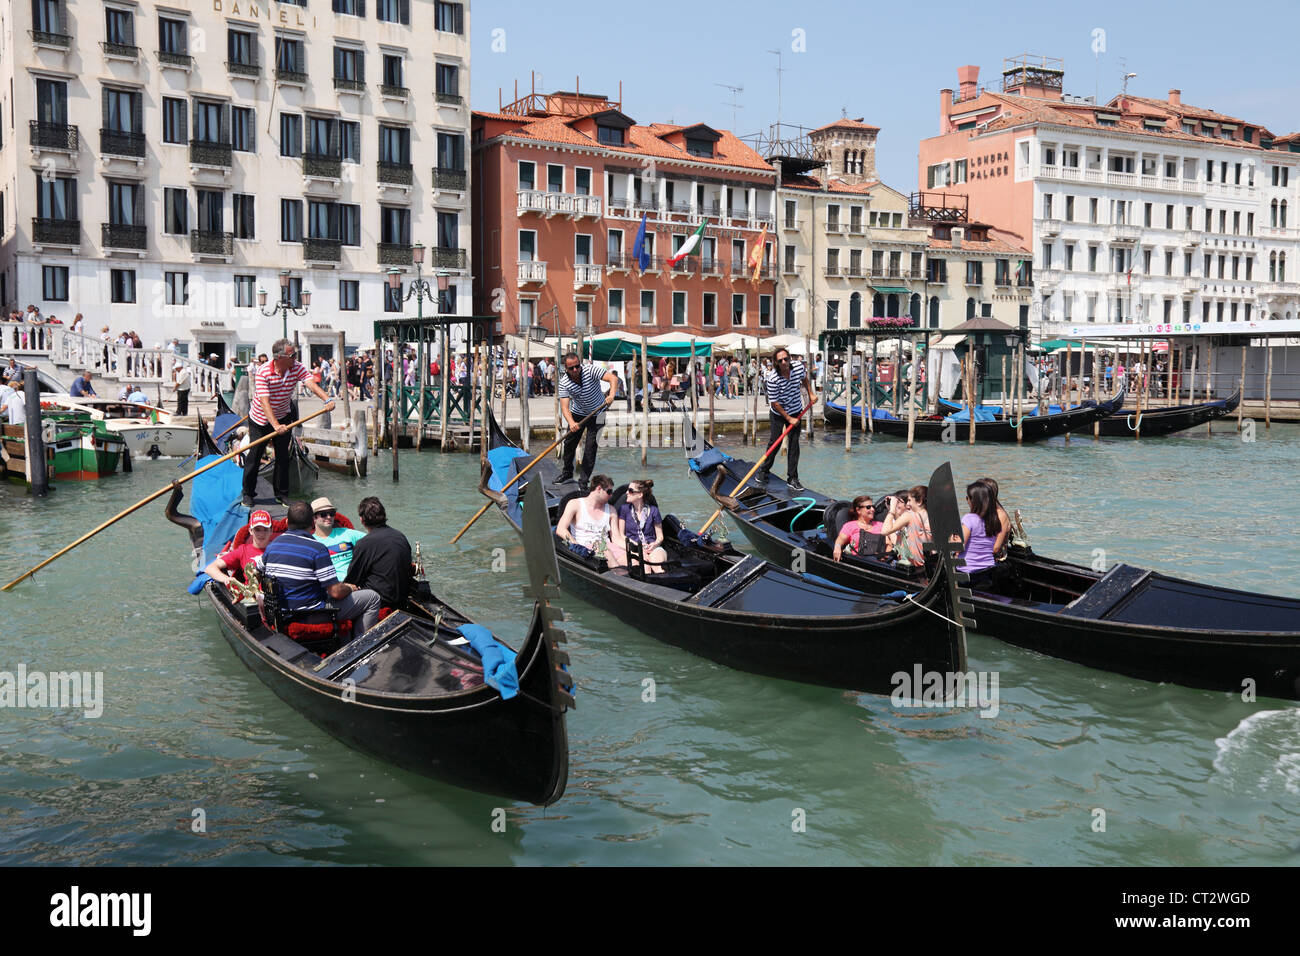 People riding in Gondolas at San Marco on the Grand Canal in Venice. Italy Stock Photo